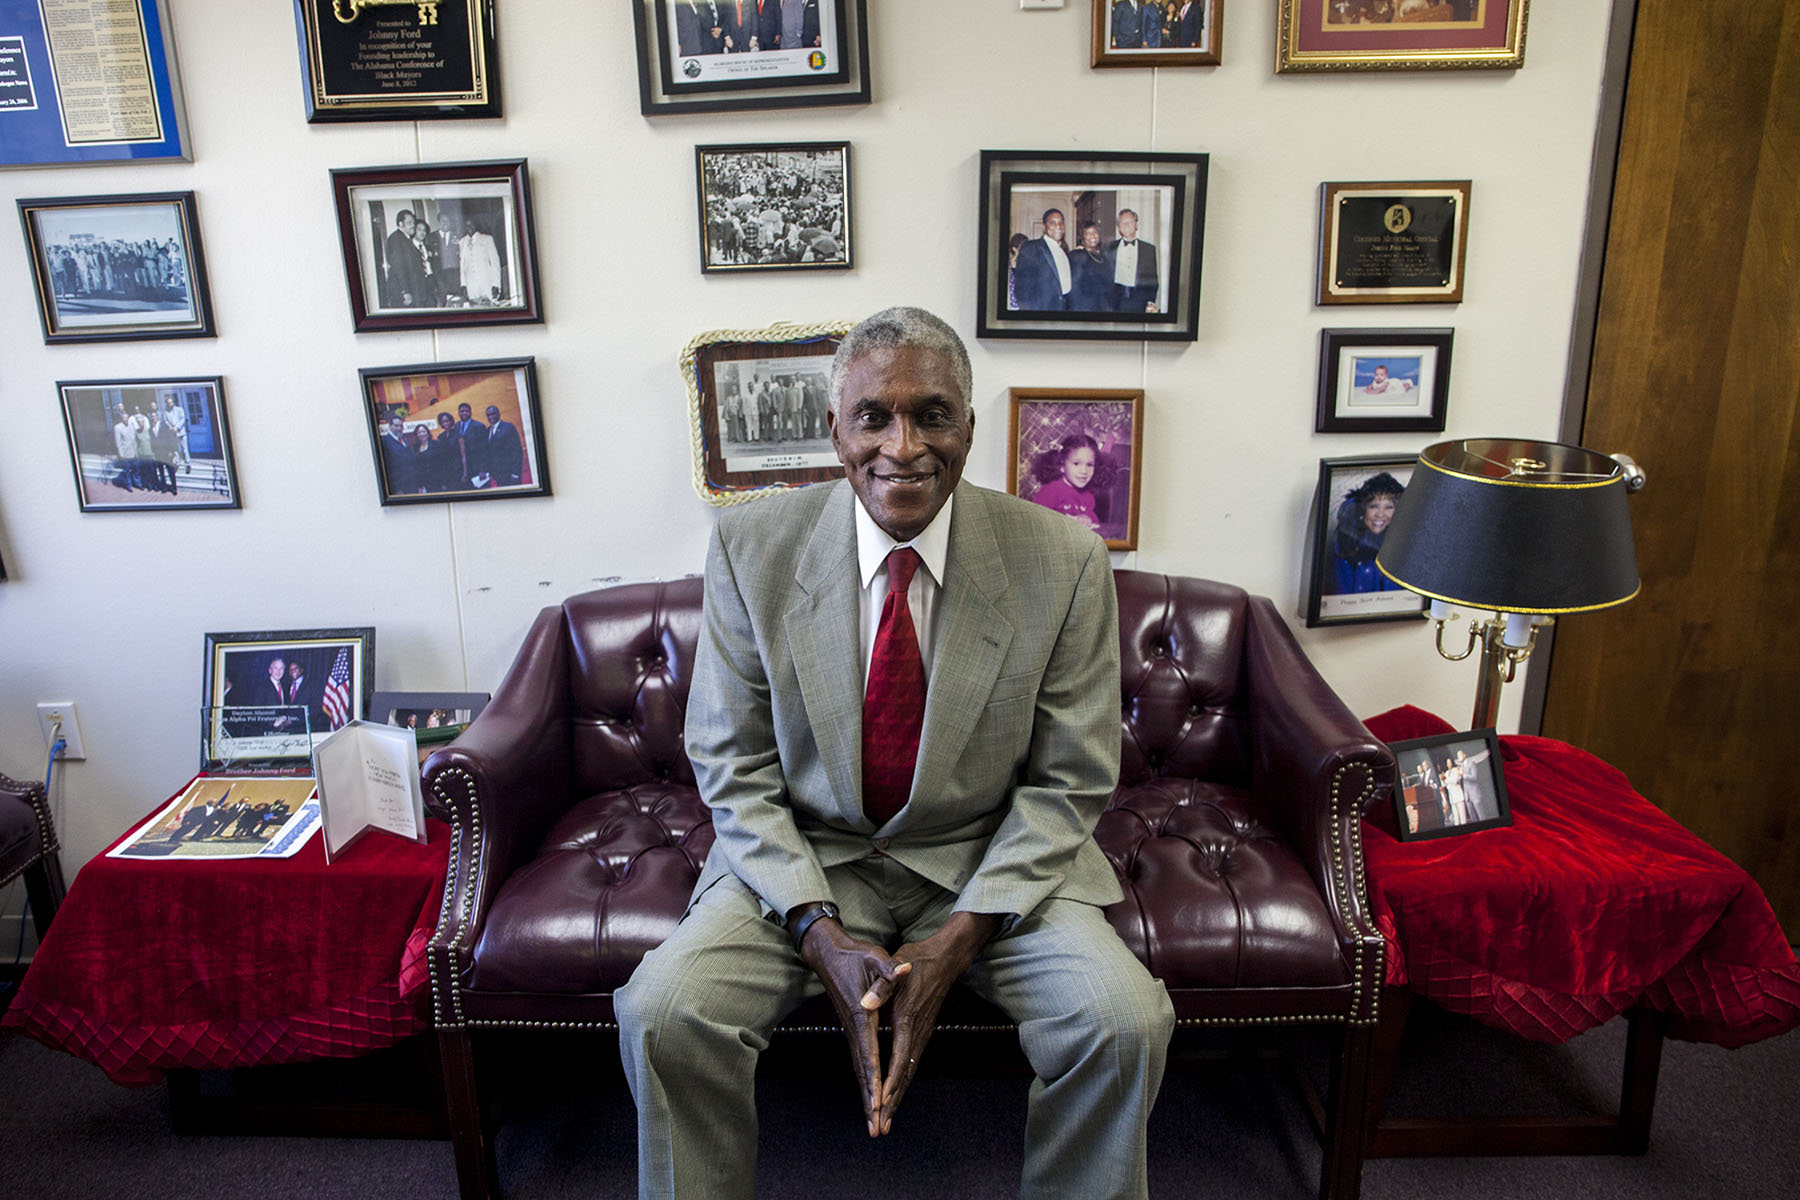 Tuskegee Mayor Johnny Ford sits in front of a wall of photographs in his office. Ford said the wall is a mix of professional and personal mementos. (Jeffrey Pierre/News21)